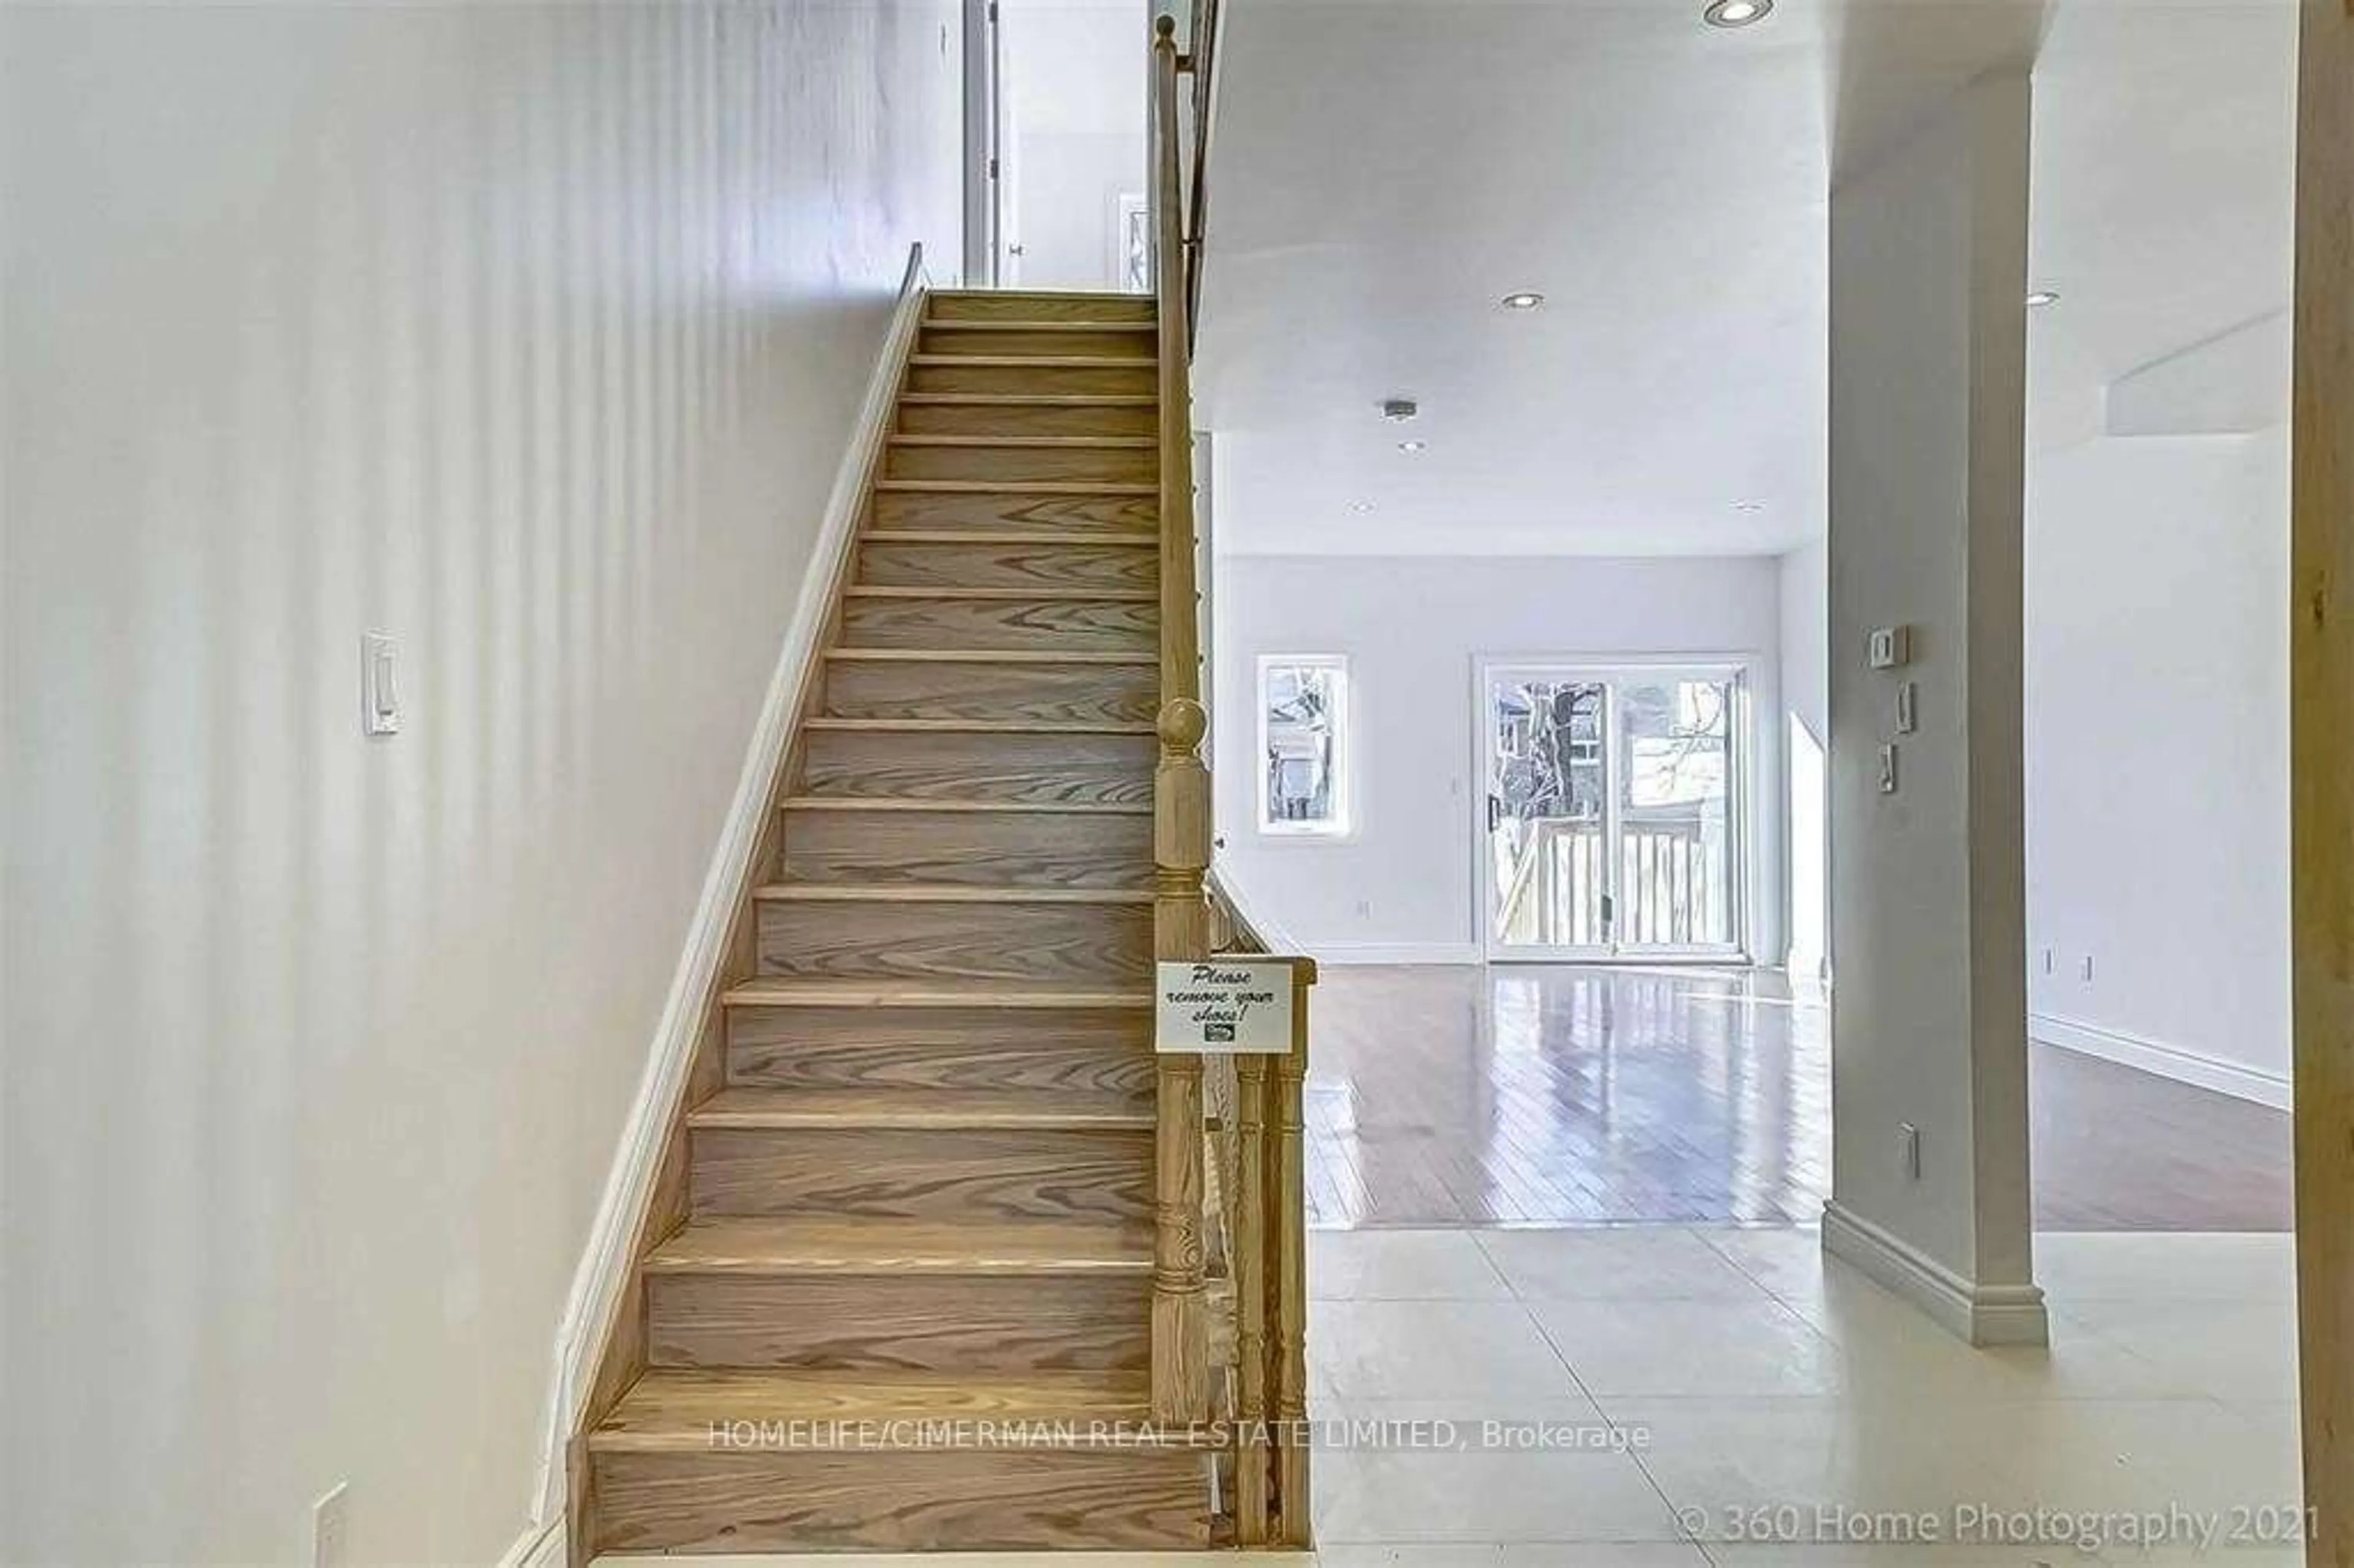 Stairs for 434B Midland Ave, Toronto Ontario M1N 4A5